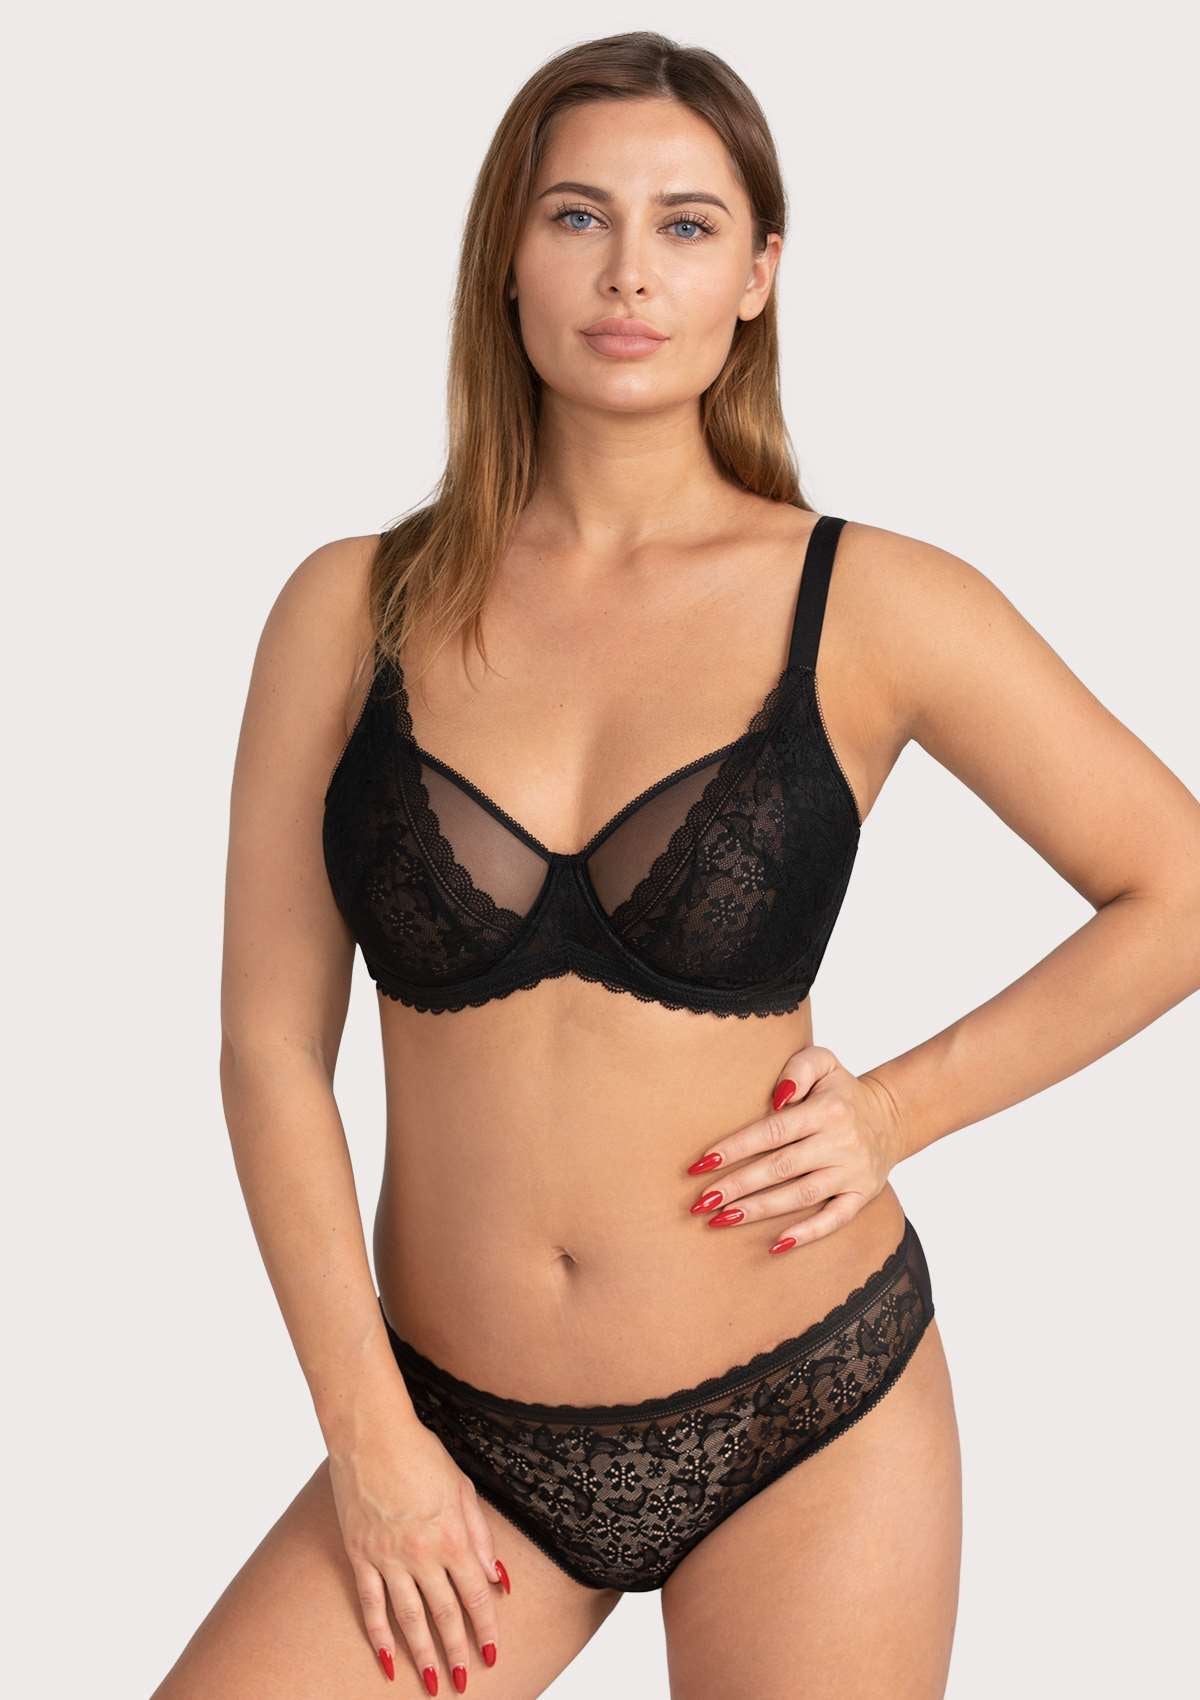 HSIA Anemone Lace Bra And Panties: Back Support Wired Bra - Black / 38 / DD/E